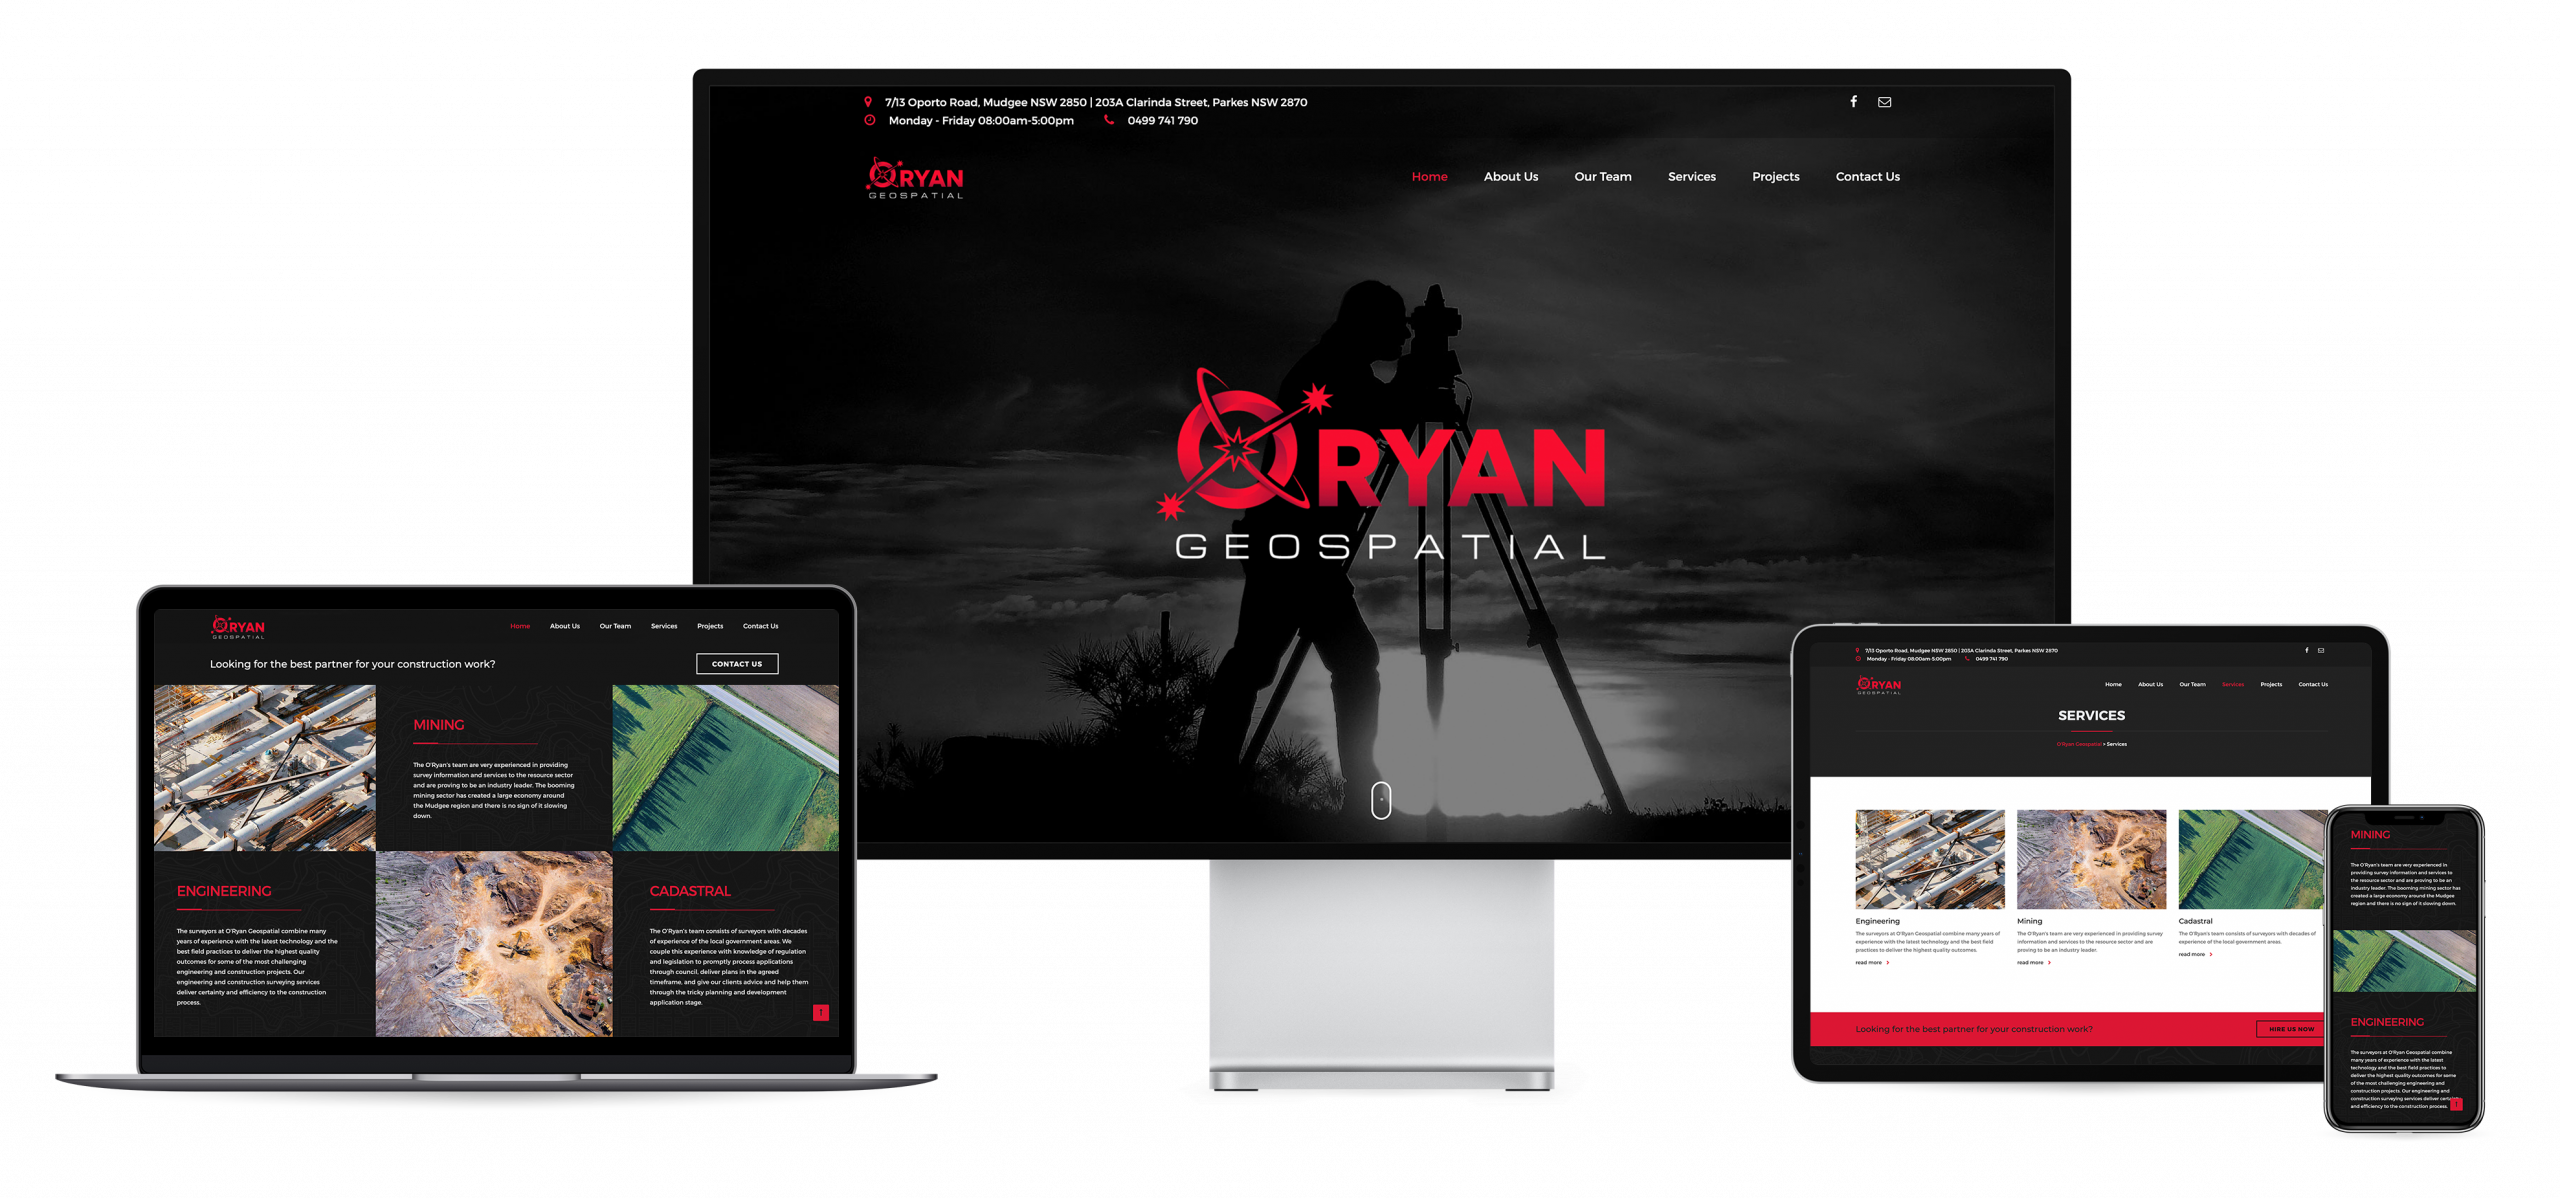 O'Ryan Geospatial website on desktop, laptop, tablet and smart phone devices